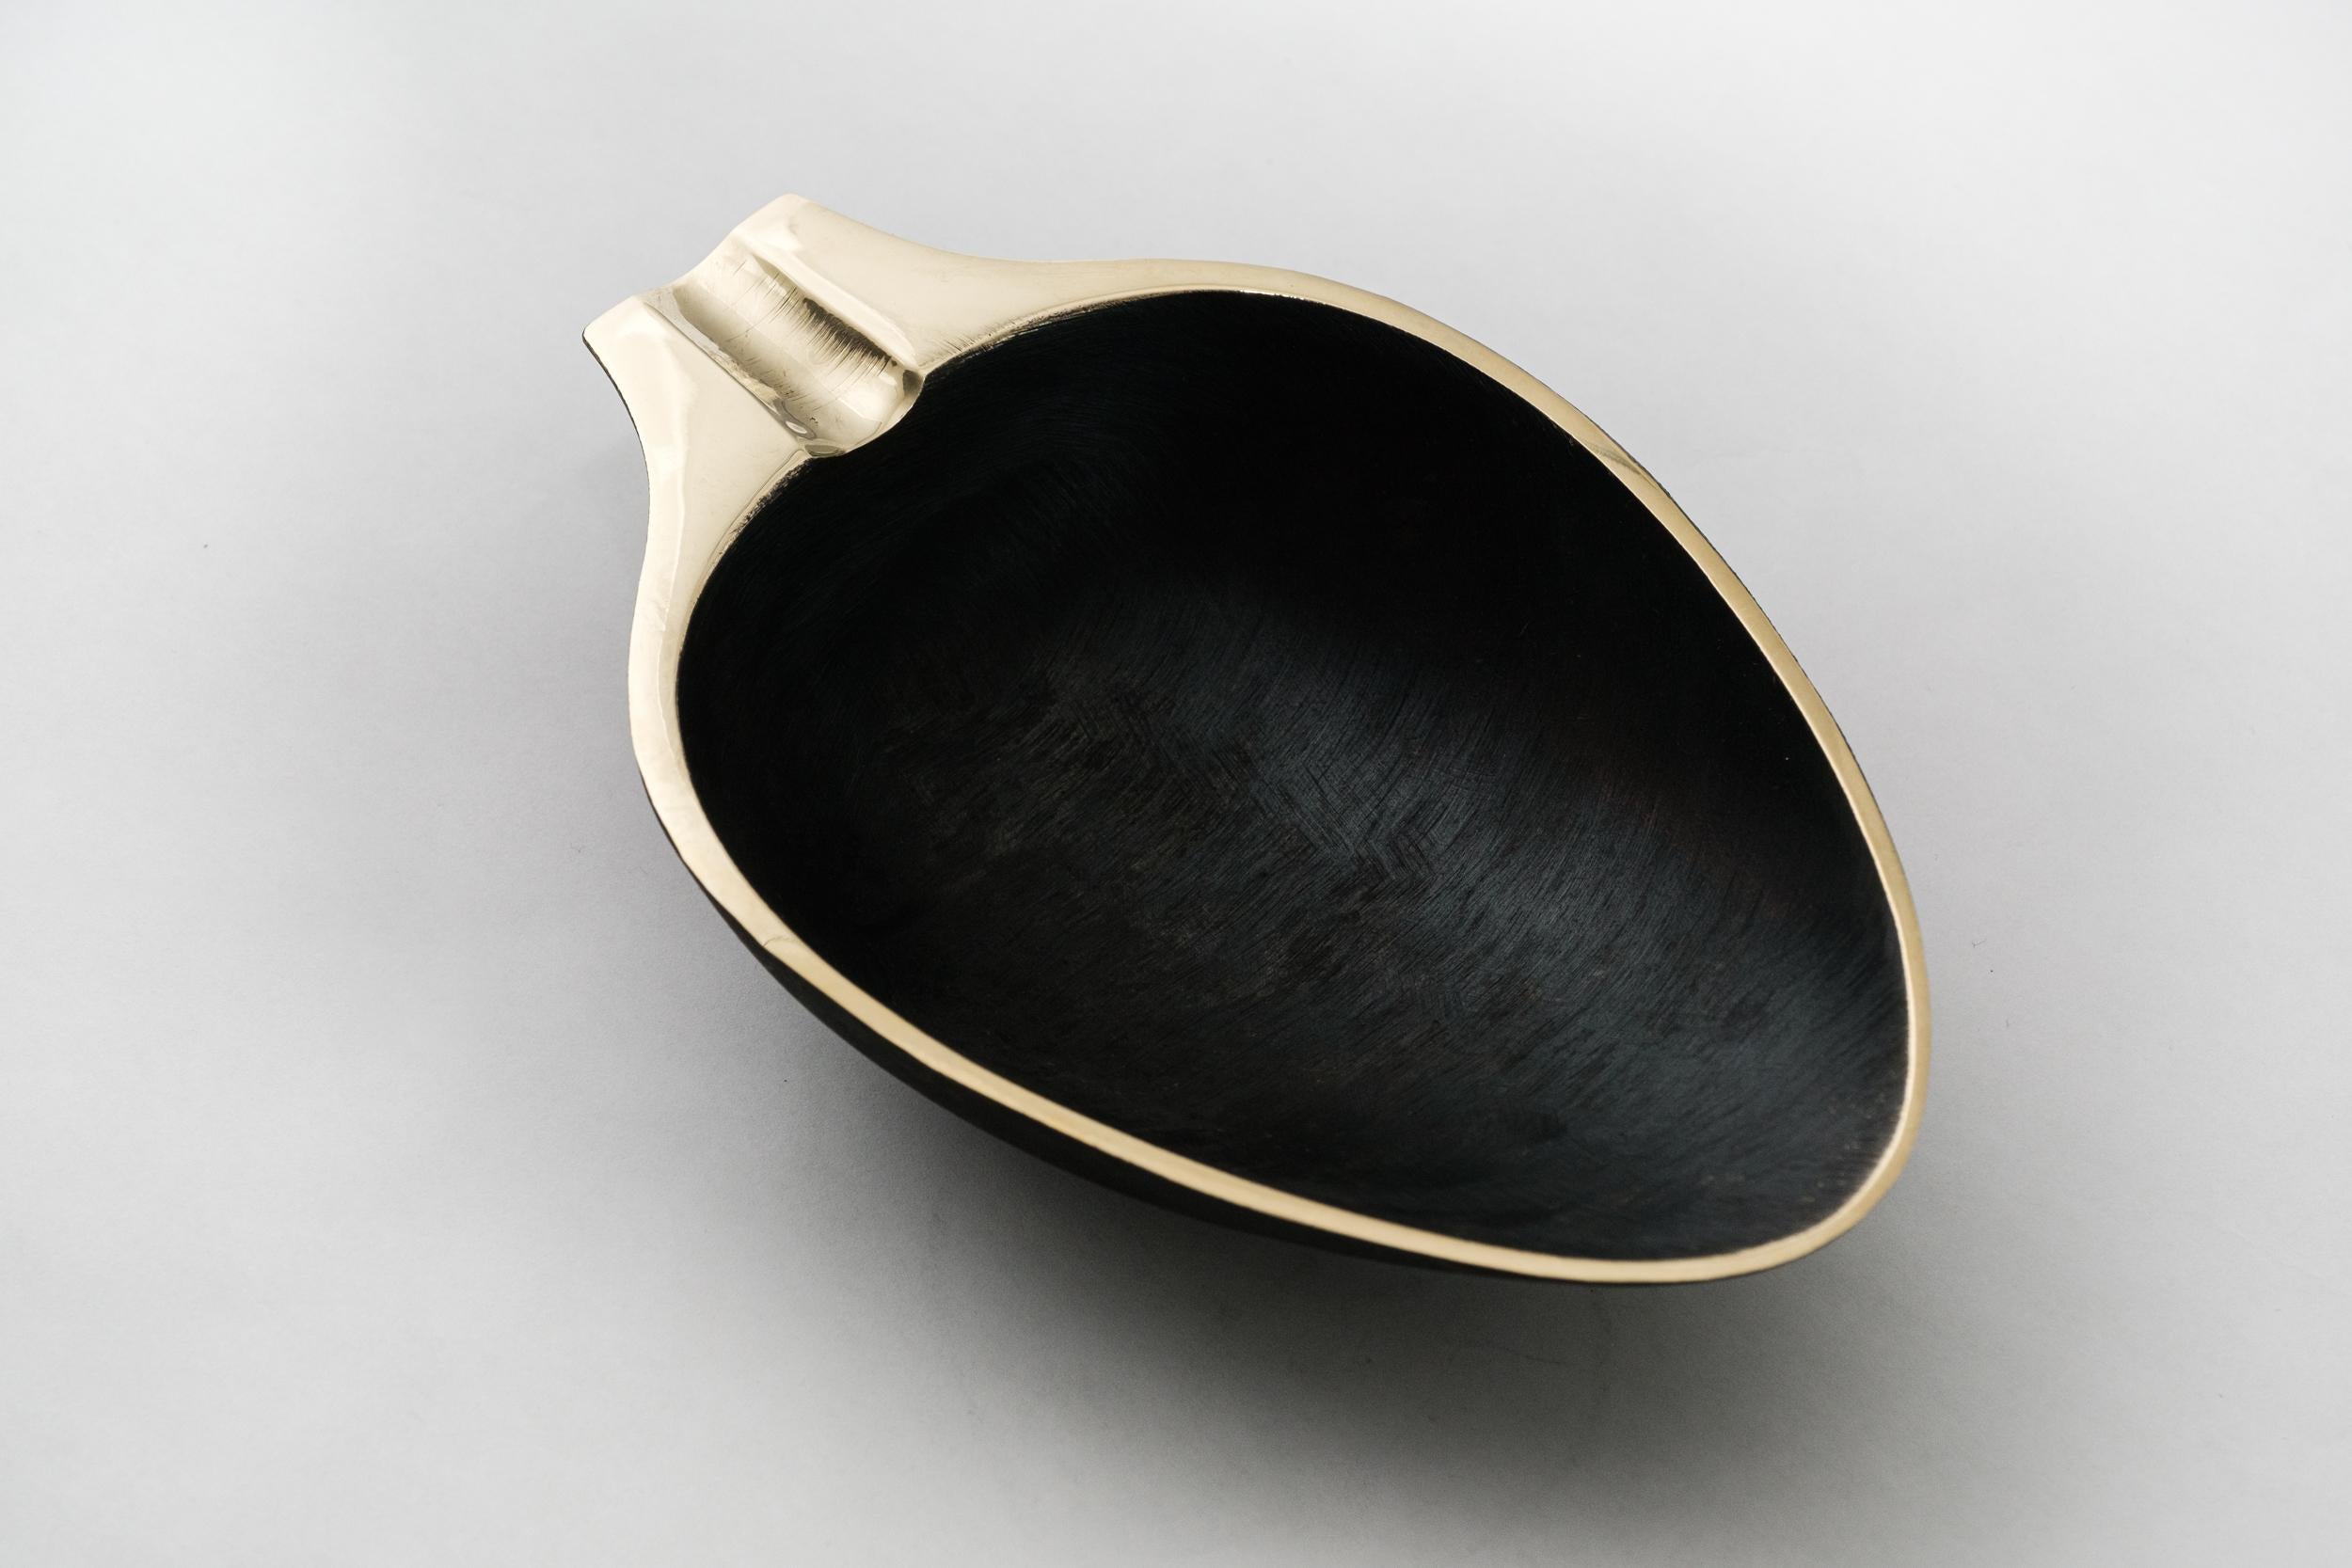 Carl Aubo¨ck Model #3548 patinated brass bowl. Designed in the 1950s, this incredibly refined and sculptural Viennese bowl is executed in polished and darkly patinated brass. Originally conceived as an ashtray, this decorative vessel can be used for